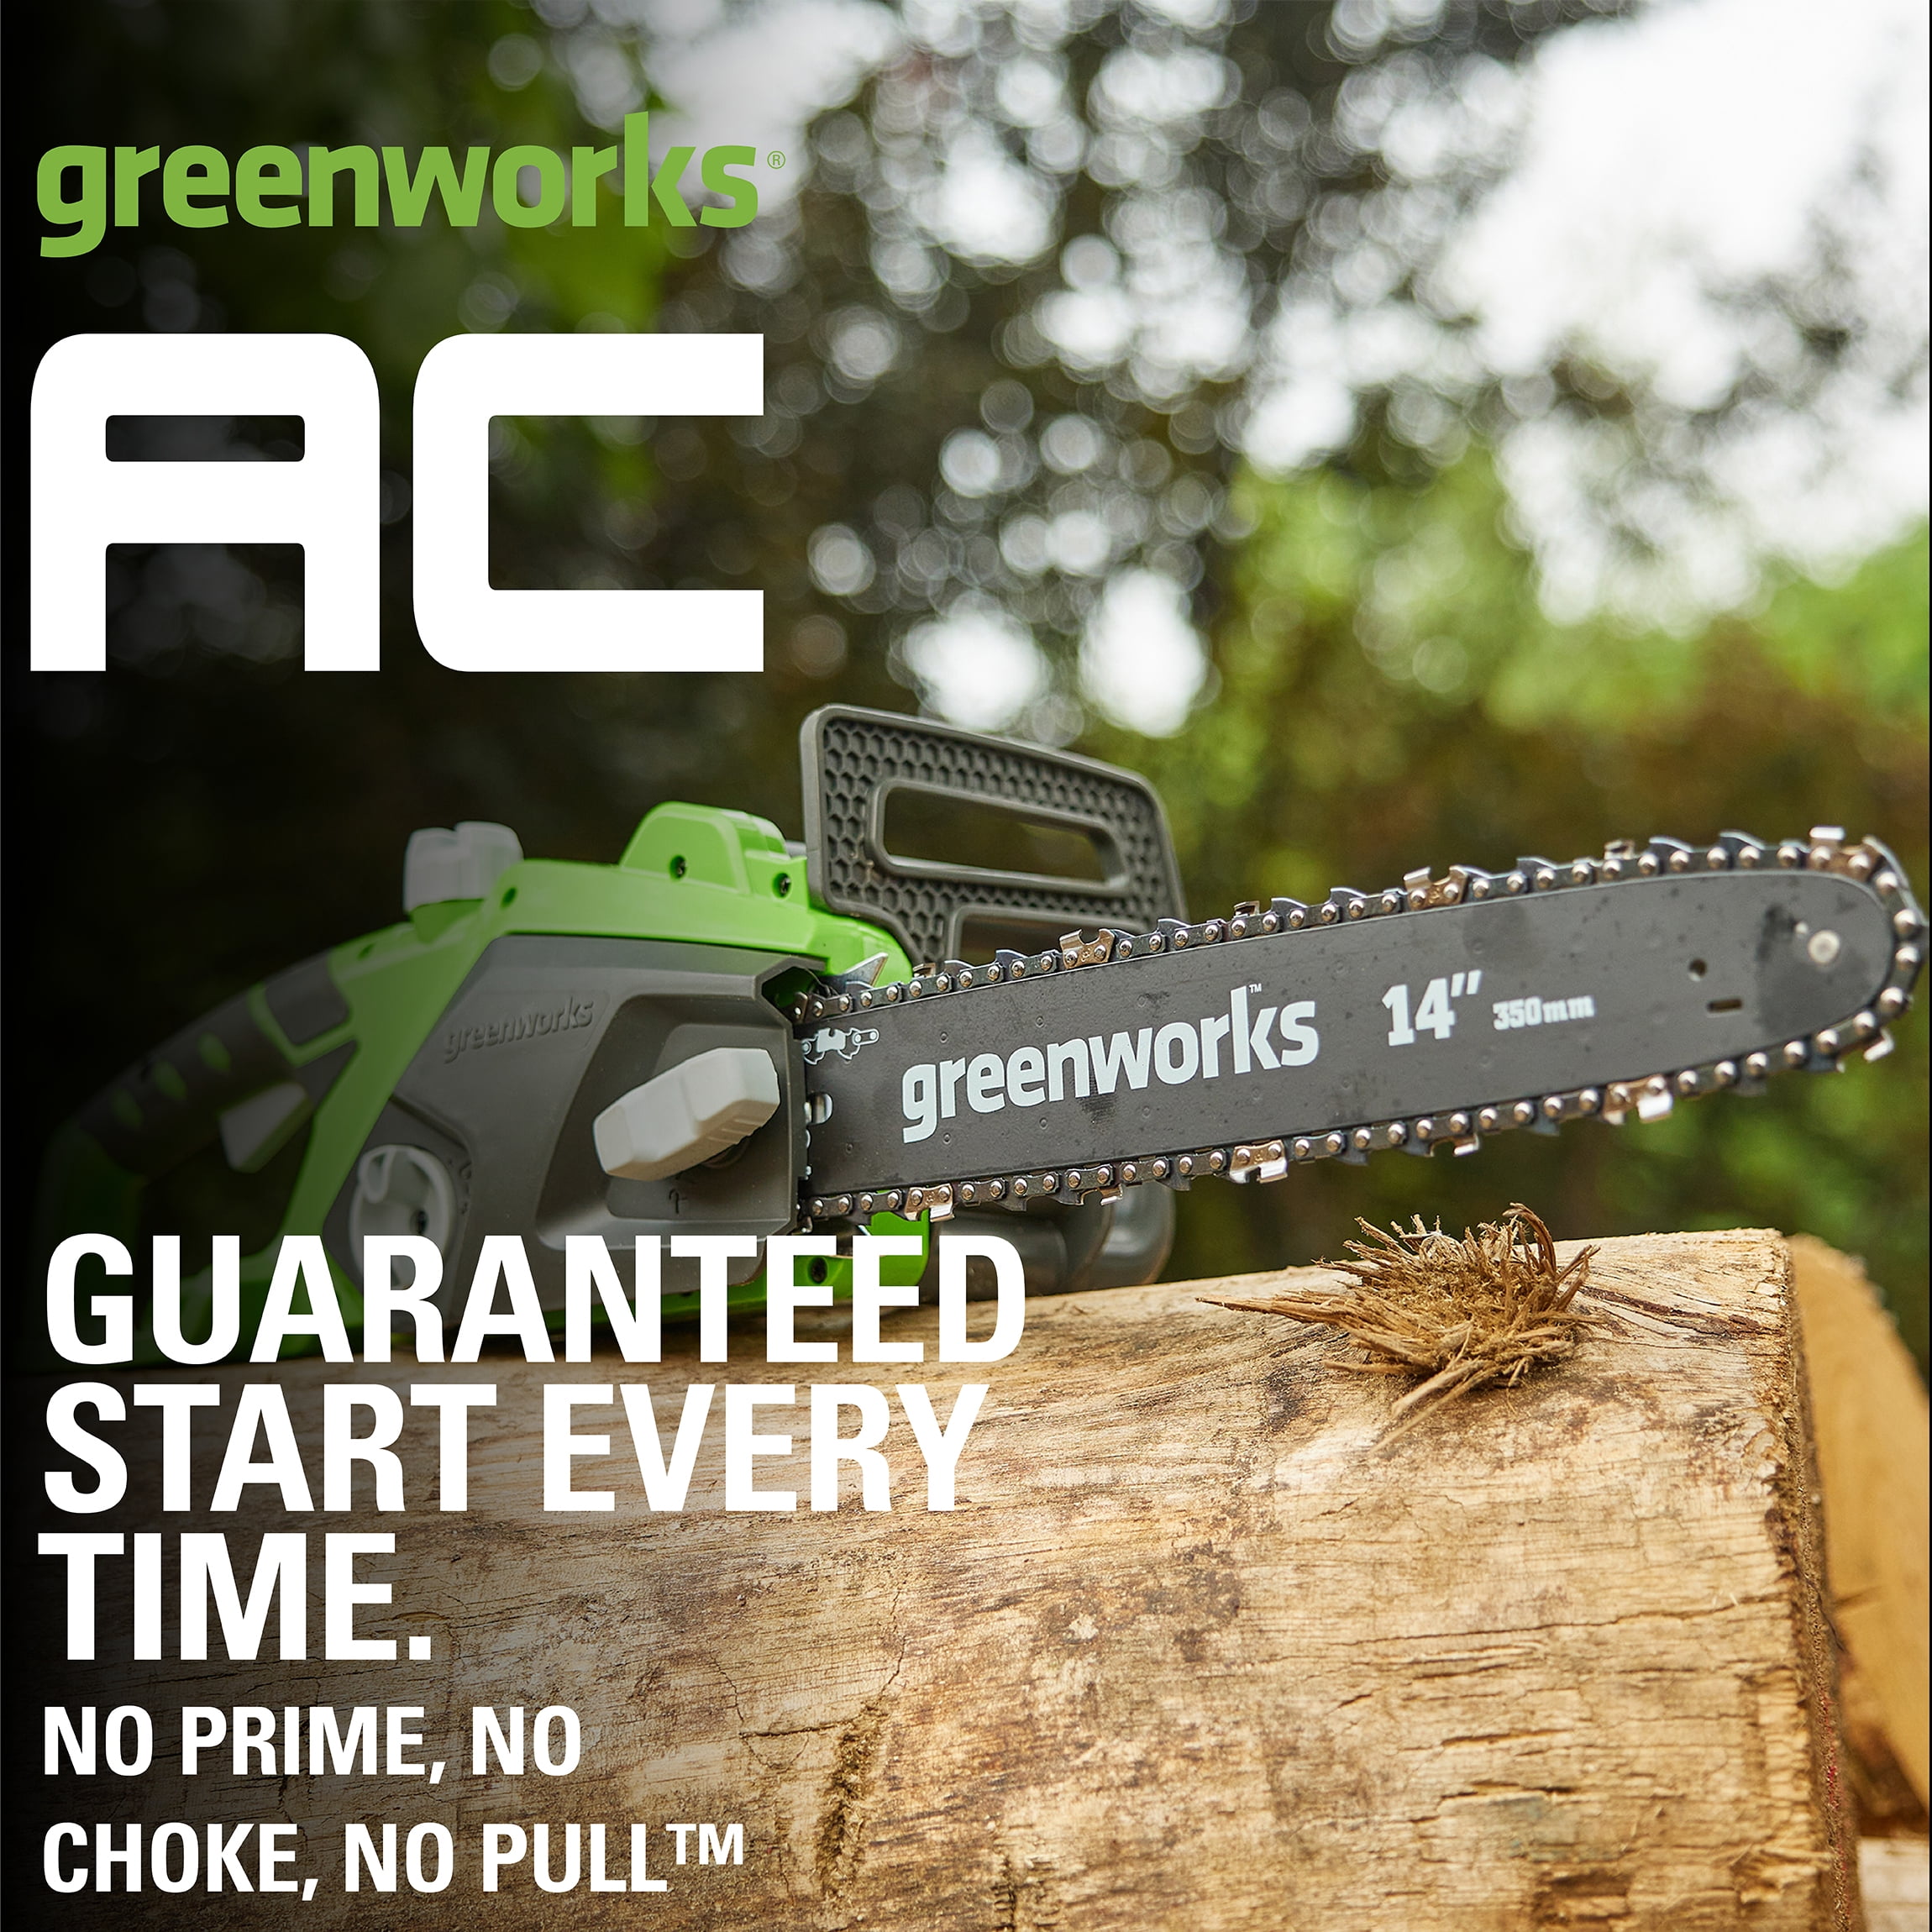 Greenworks 105 Amp 14-inch Corded Electric Chainsaw, 20222 - 2